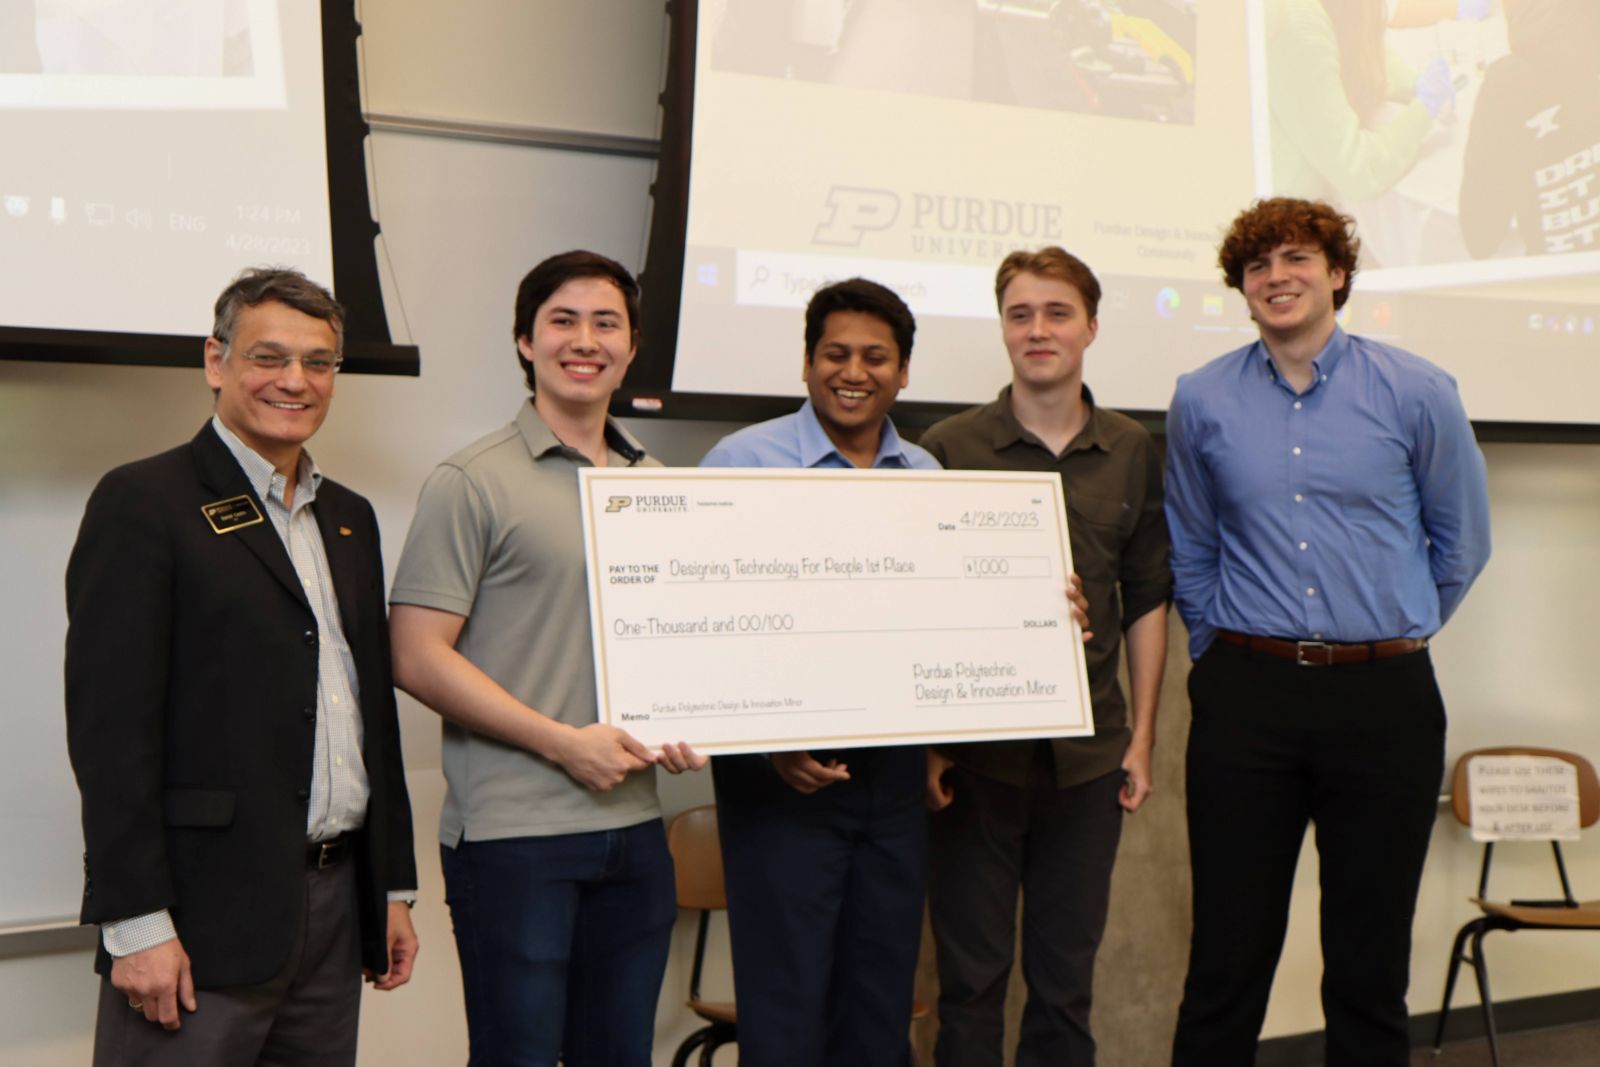 The Helping Pilots team with Purdue Polytechnic Dean Daniel Castro-Lacouture at the Design and Innovation Challenge awards ceremony.